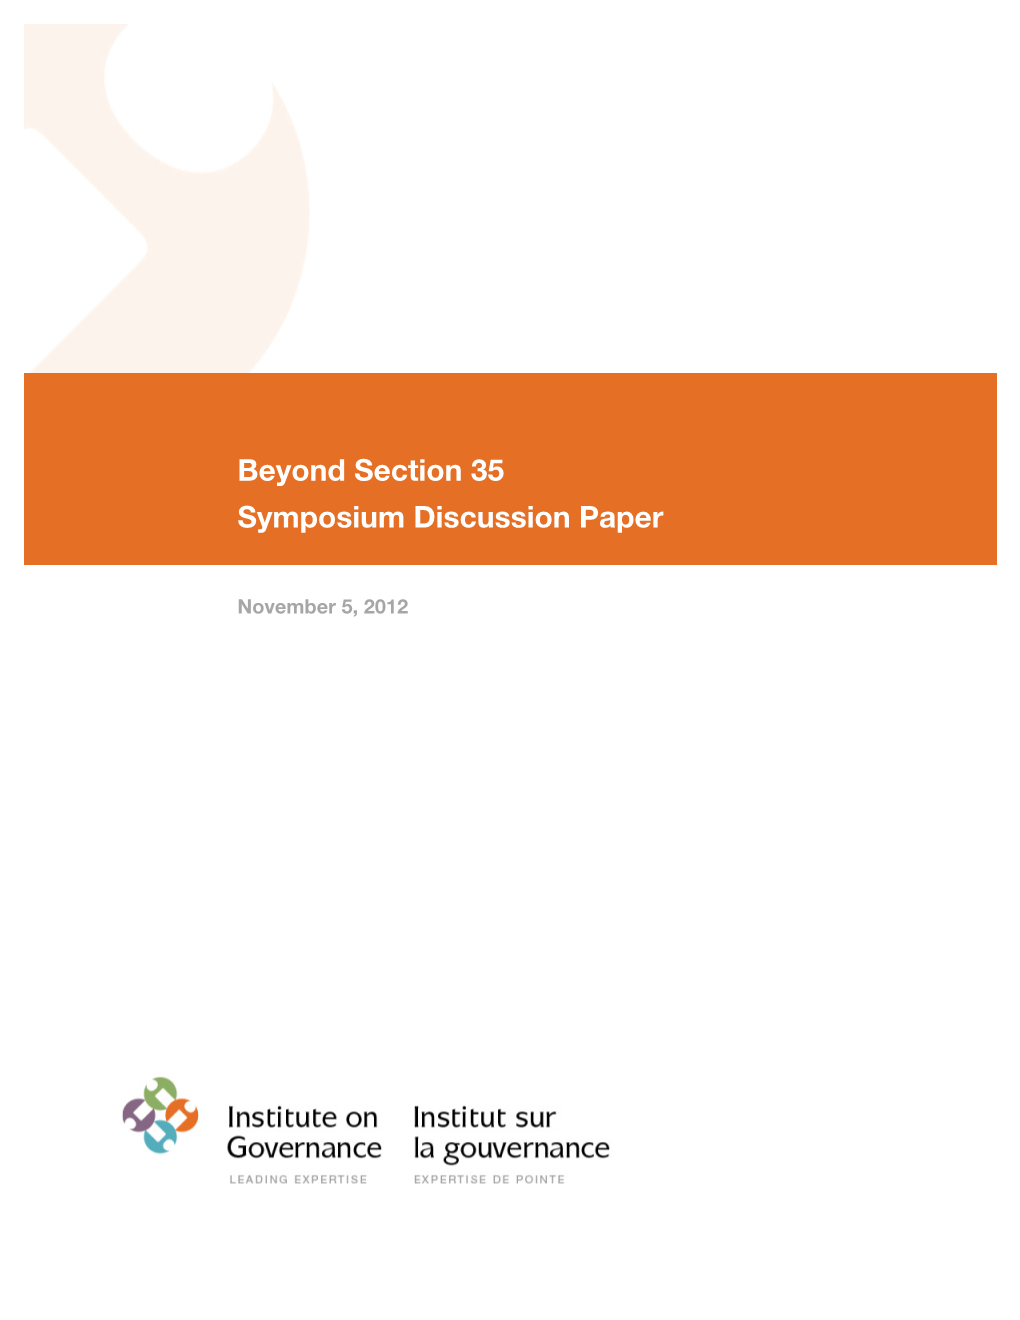 Beyond Section 35: Symposium Discussion Paper